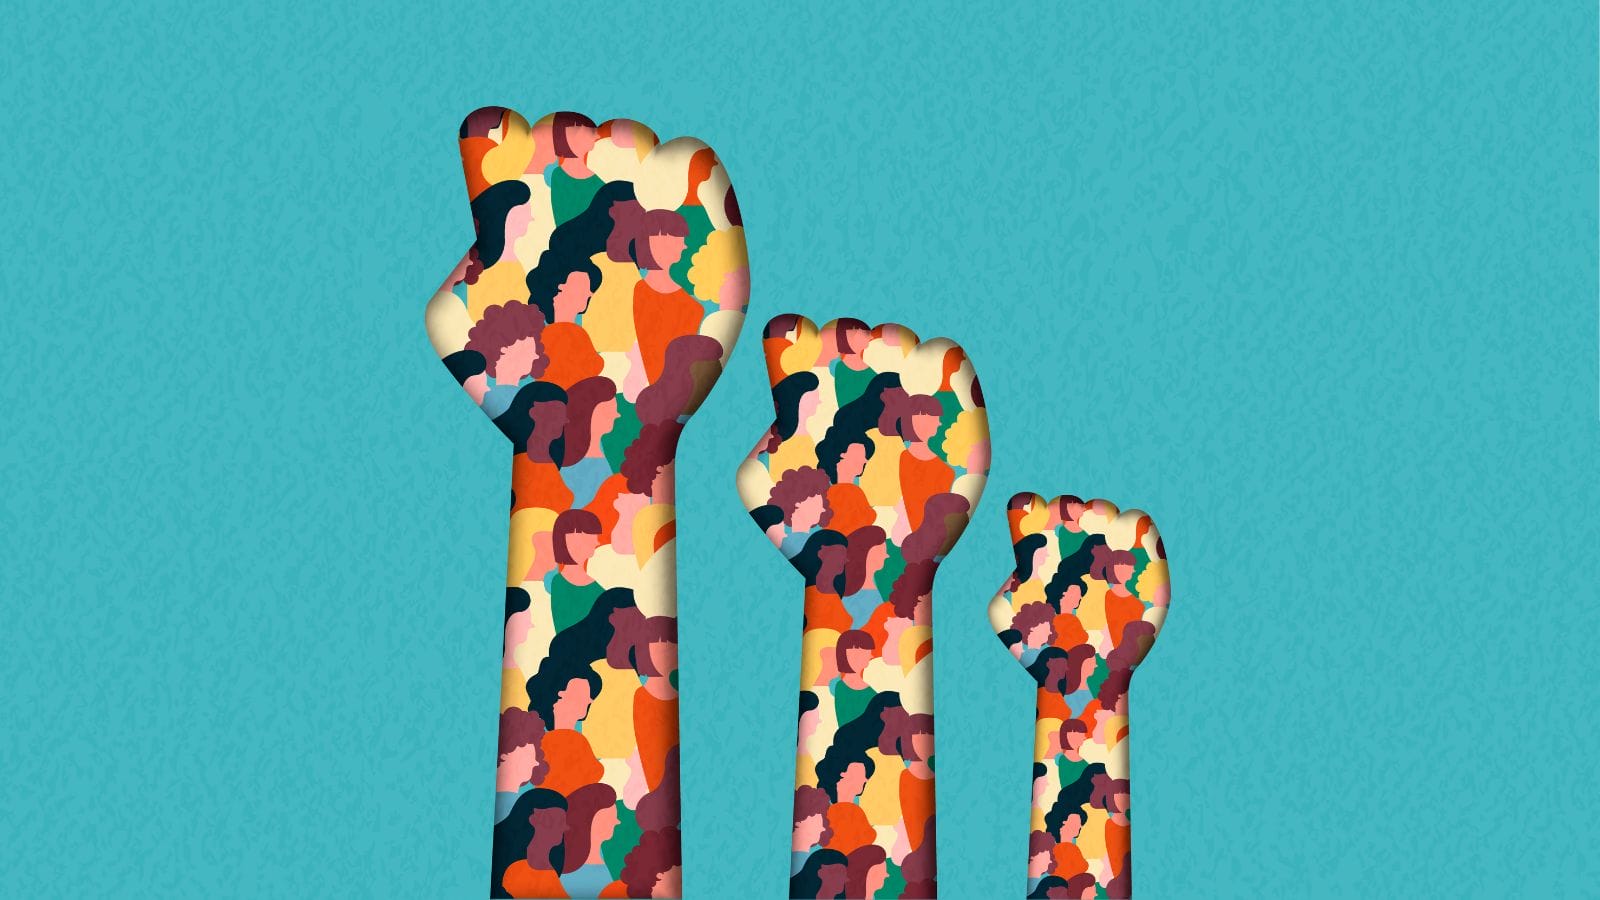 Three fists in the air; the fists themselves are made up of small images of illustrated people. This is all in-front of a blue background.